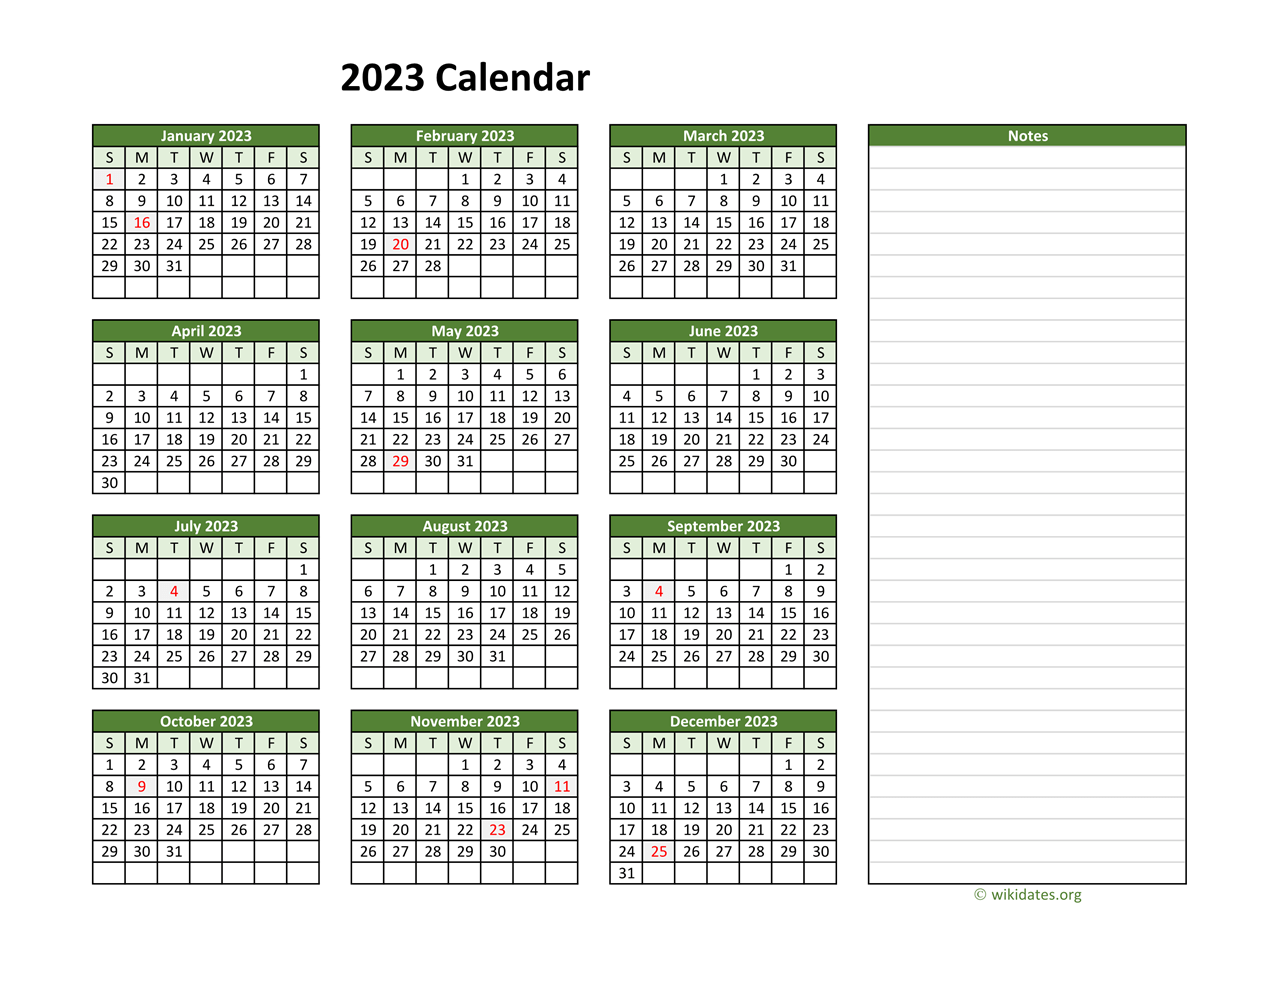 yearly-printable-2023-calendar-with-notes-wikidates